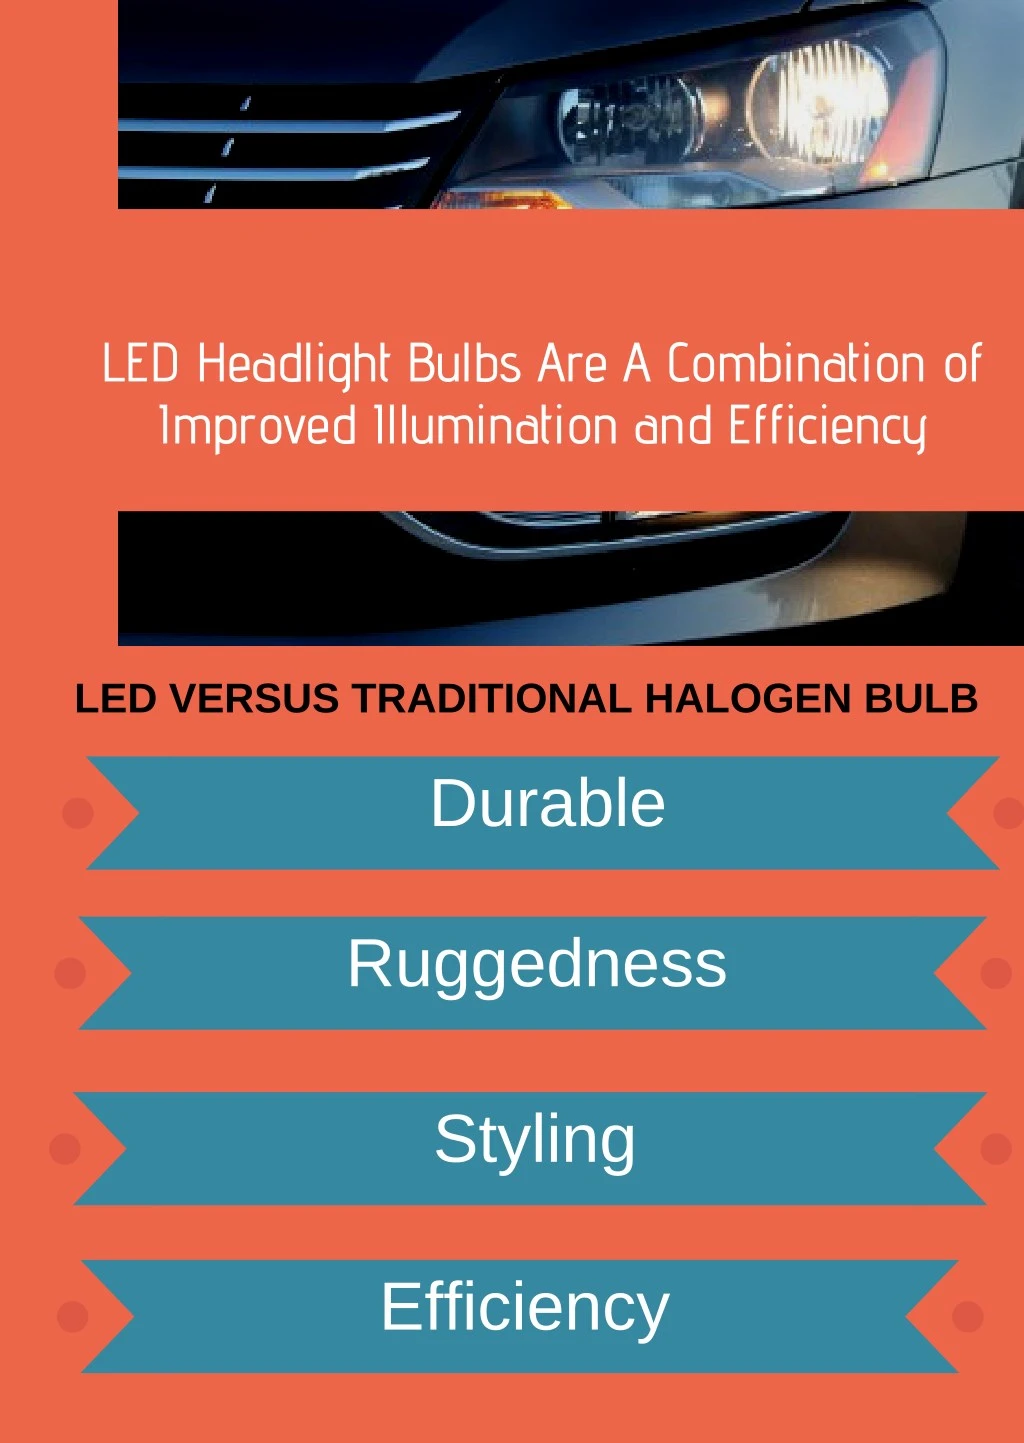 led headlight bulbs are a combination of improved